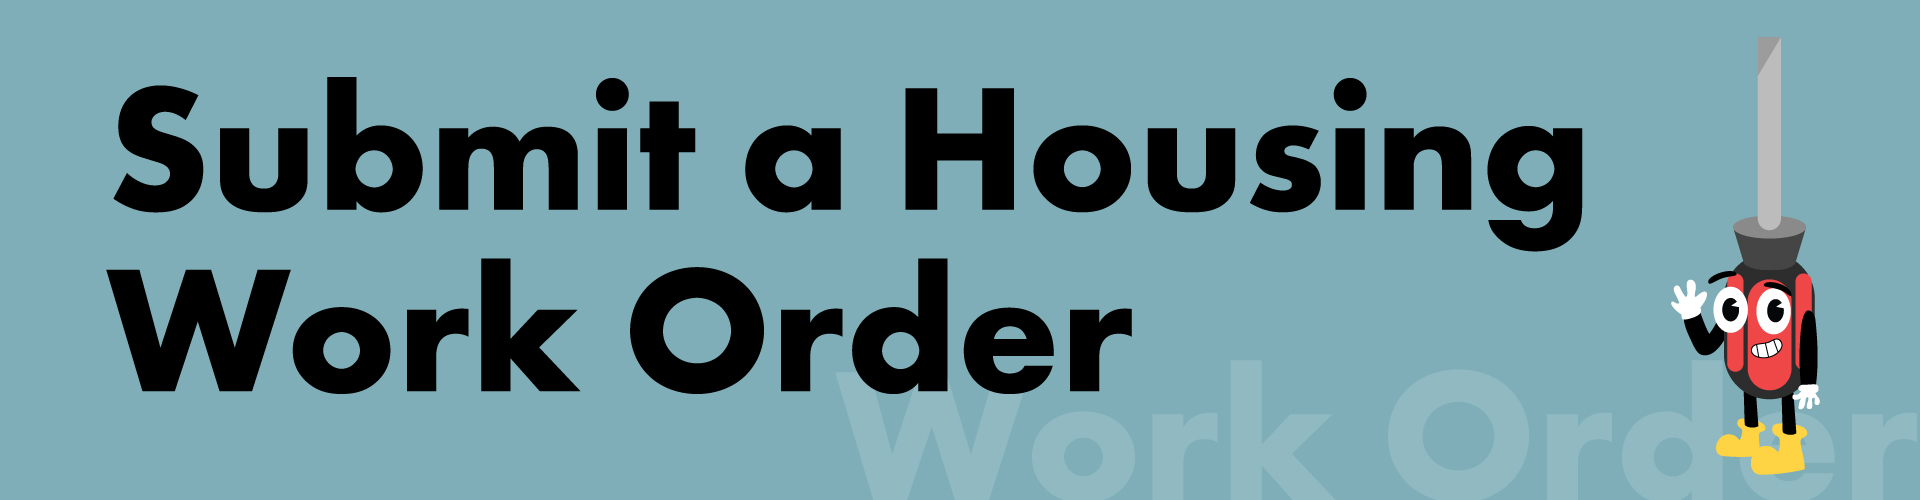 Submit a Housing Work Order